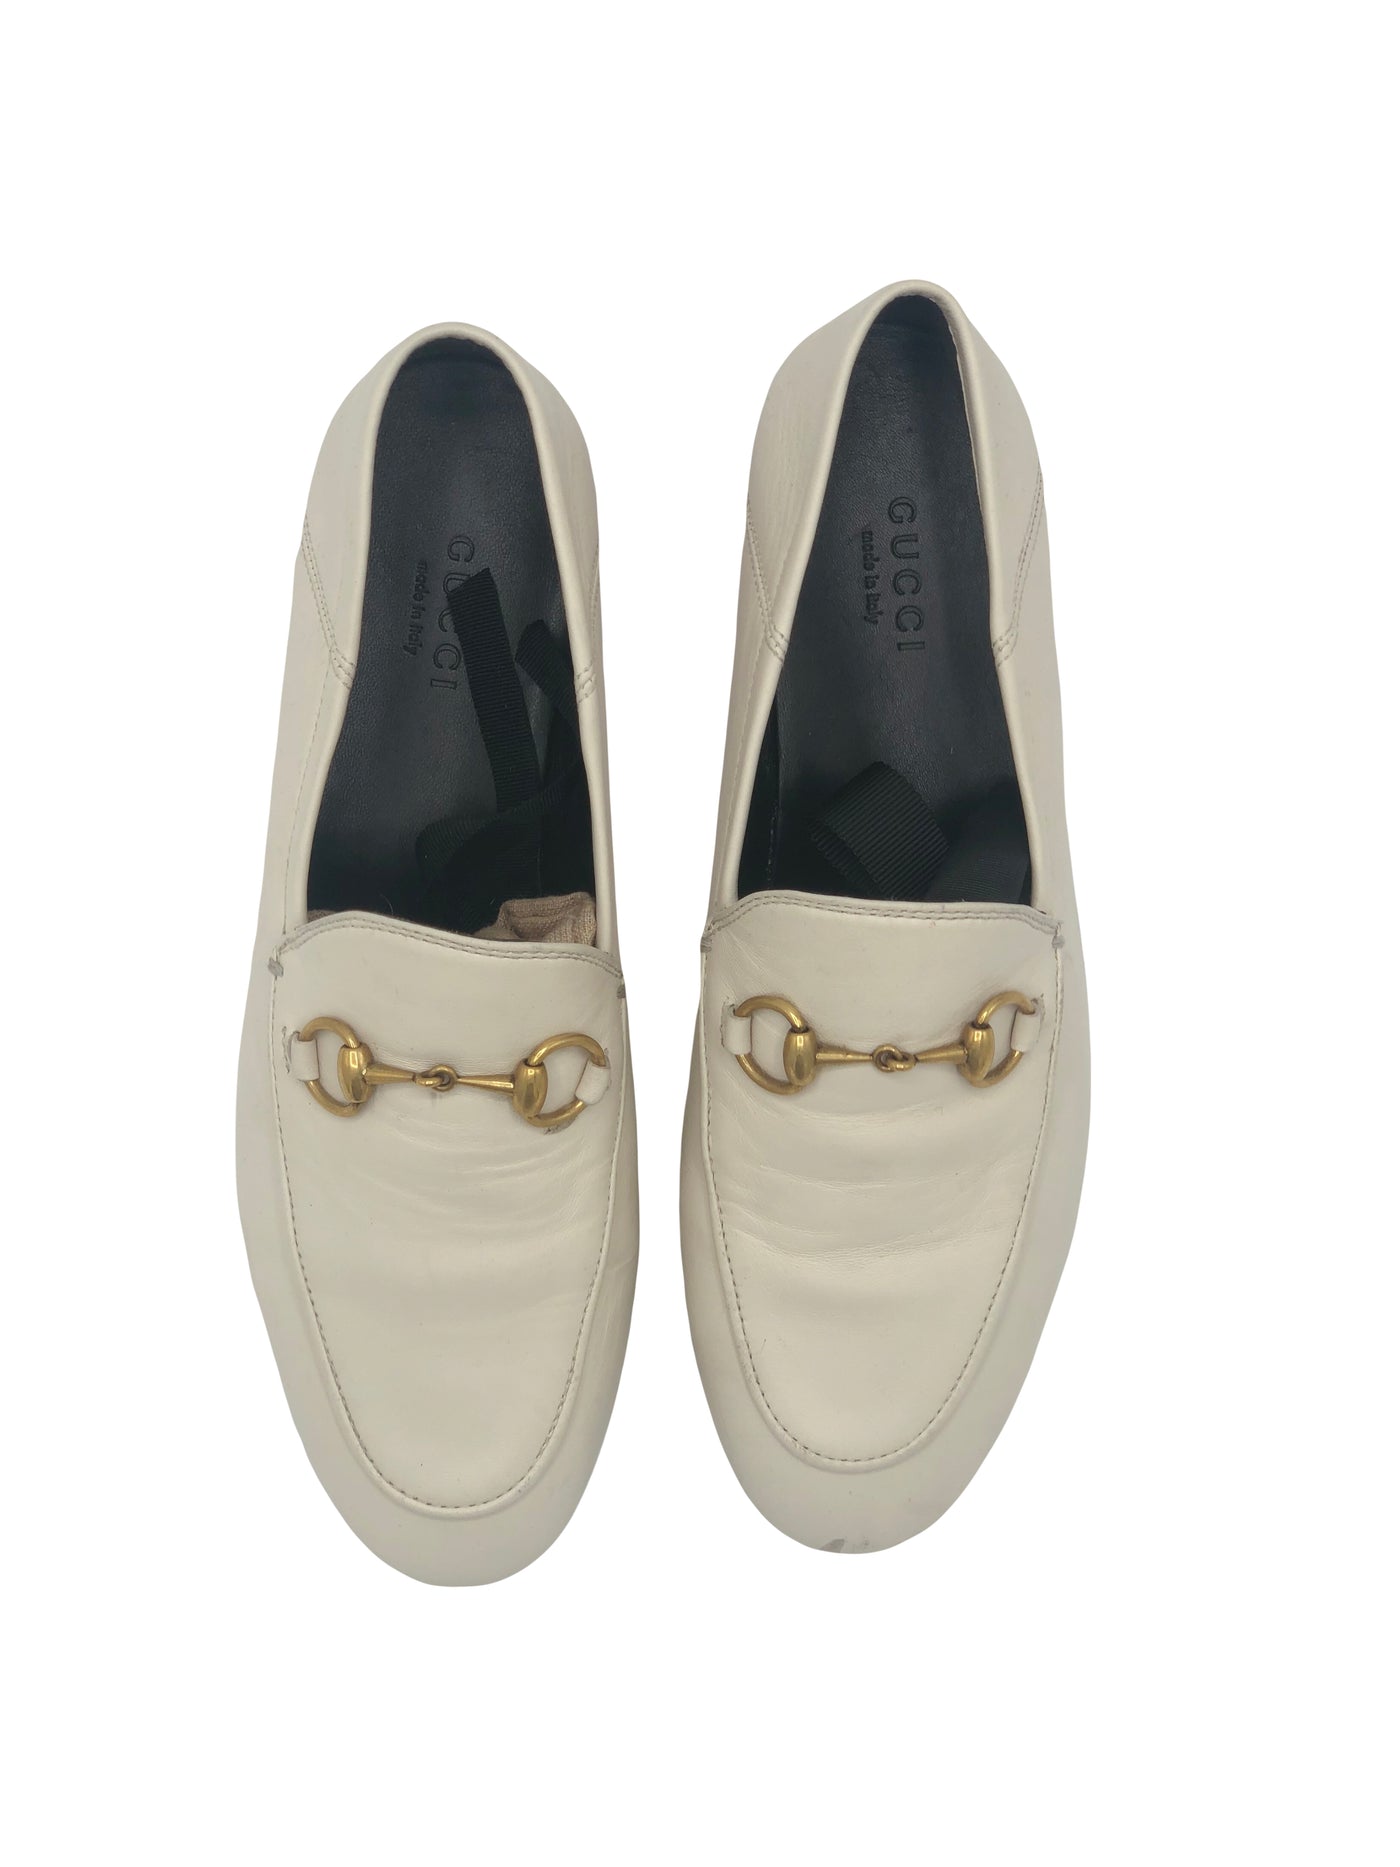 GUCCI Brixton white leather loafers size 36 RRP: £655